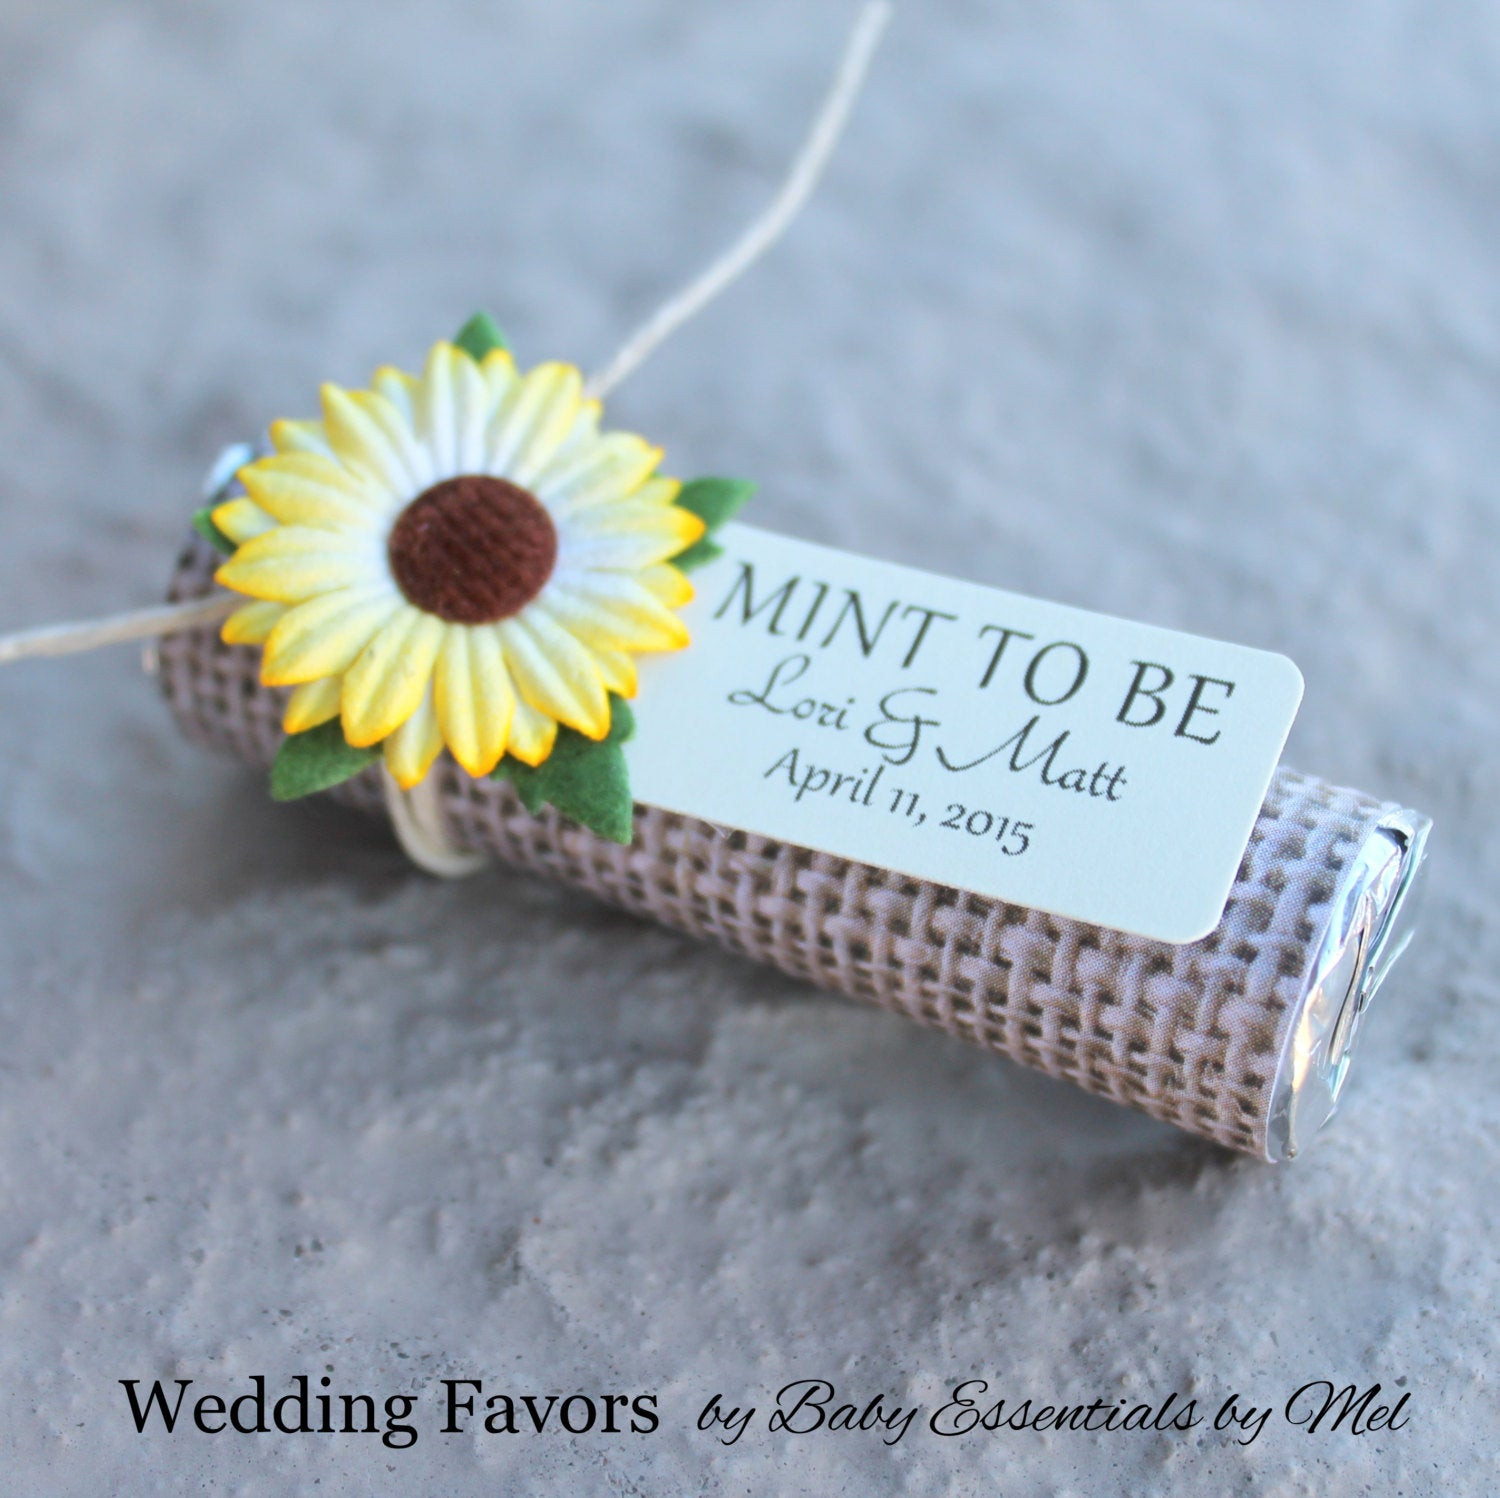 Sunflower Wedding Favors
 sunflower wedding favors with personalized by